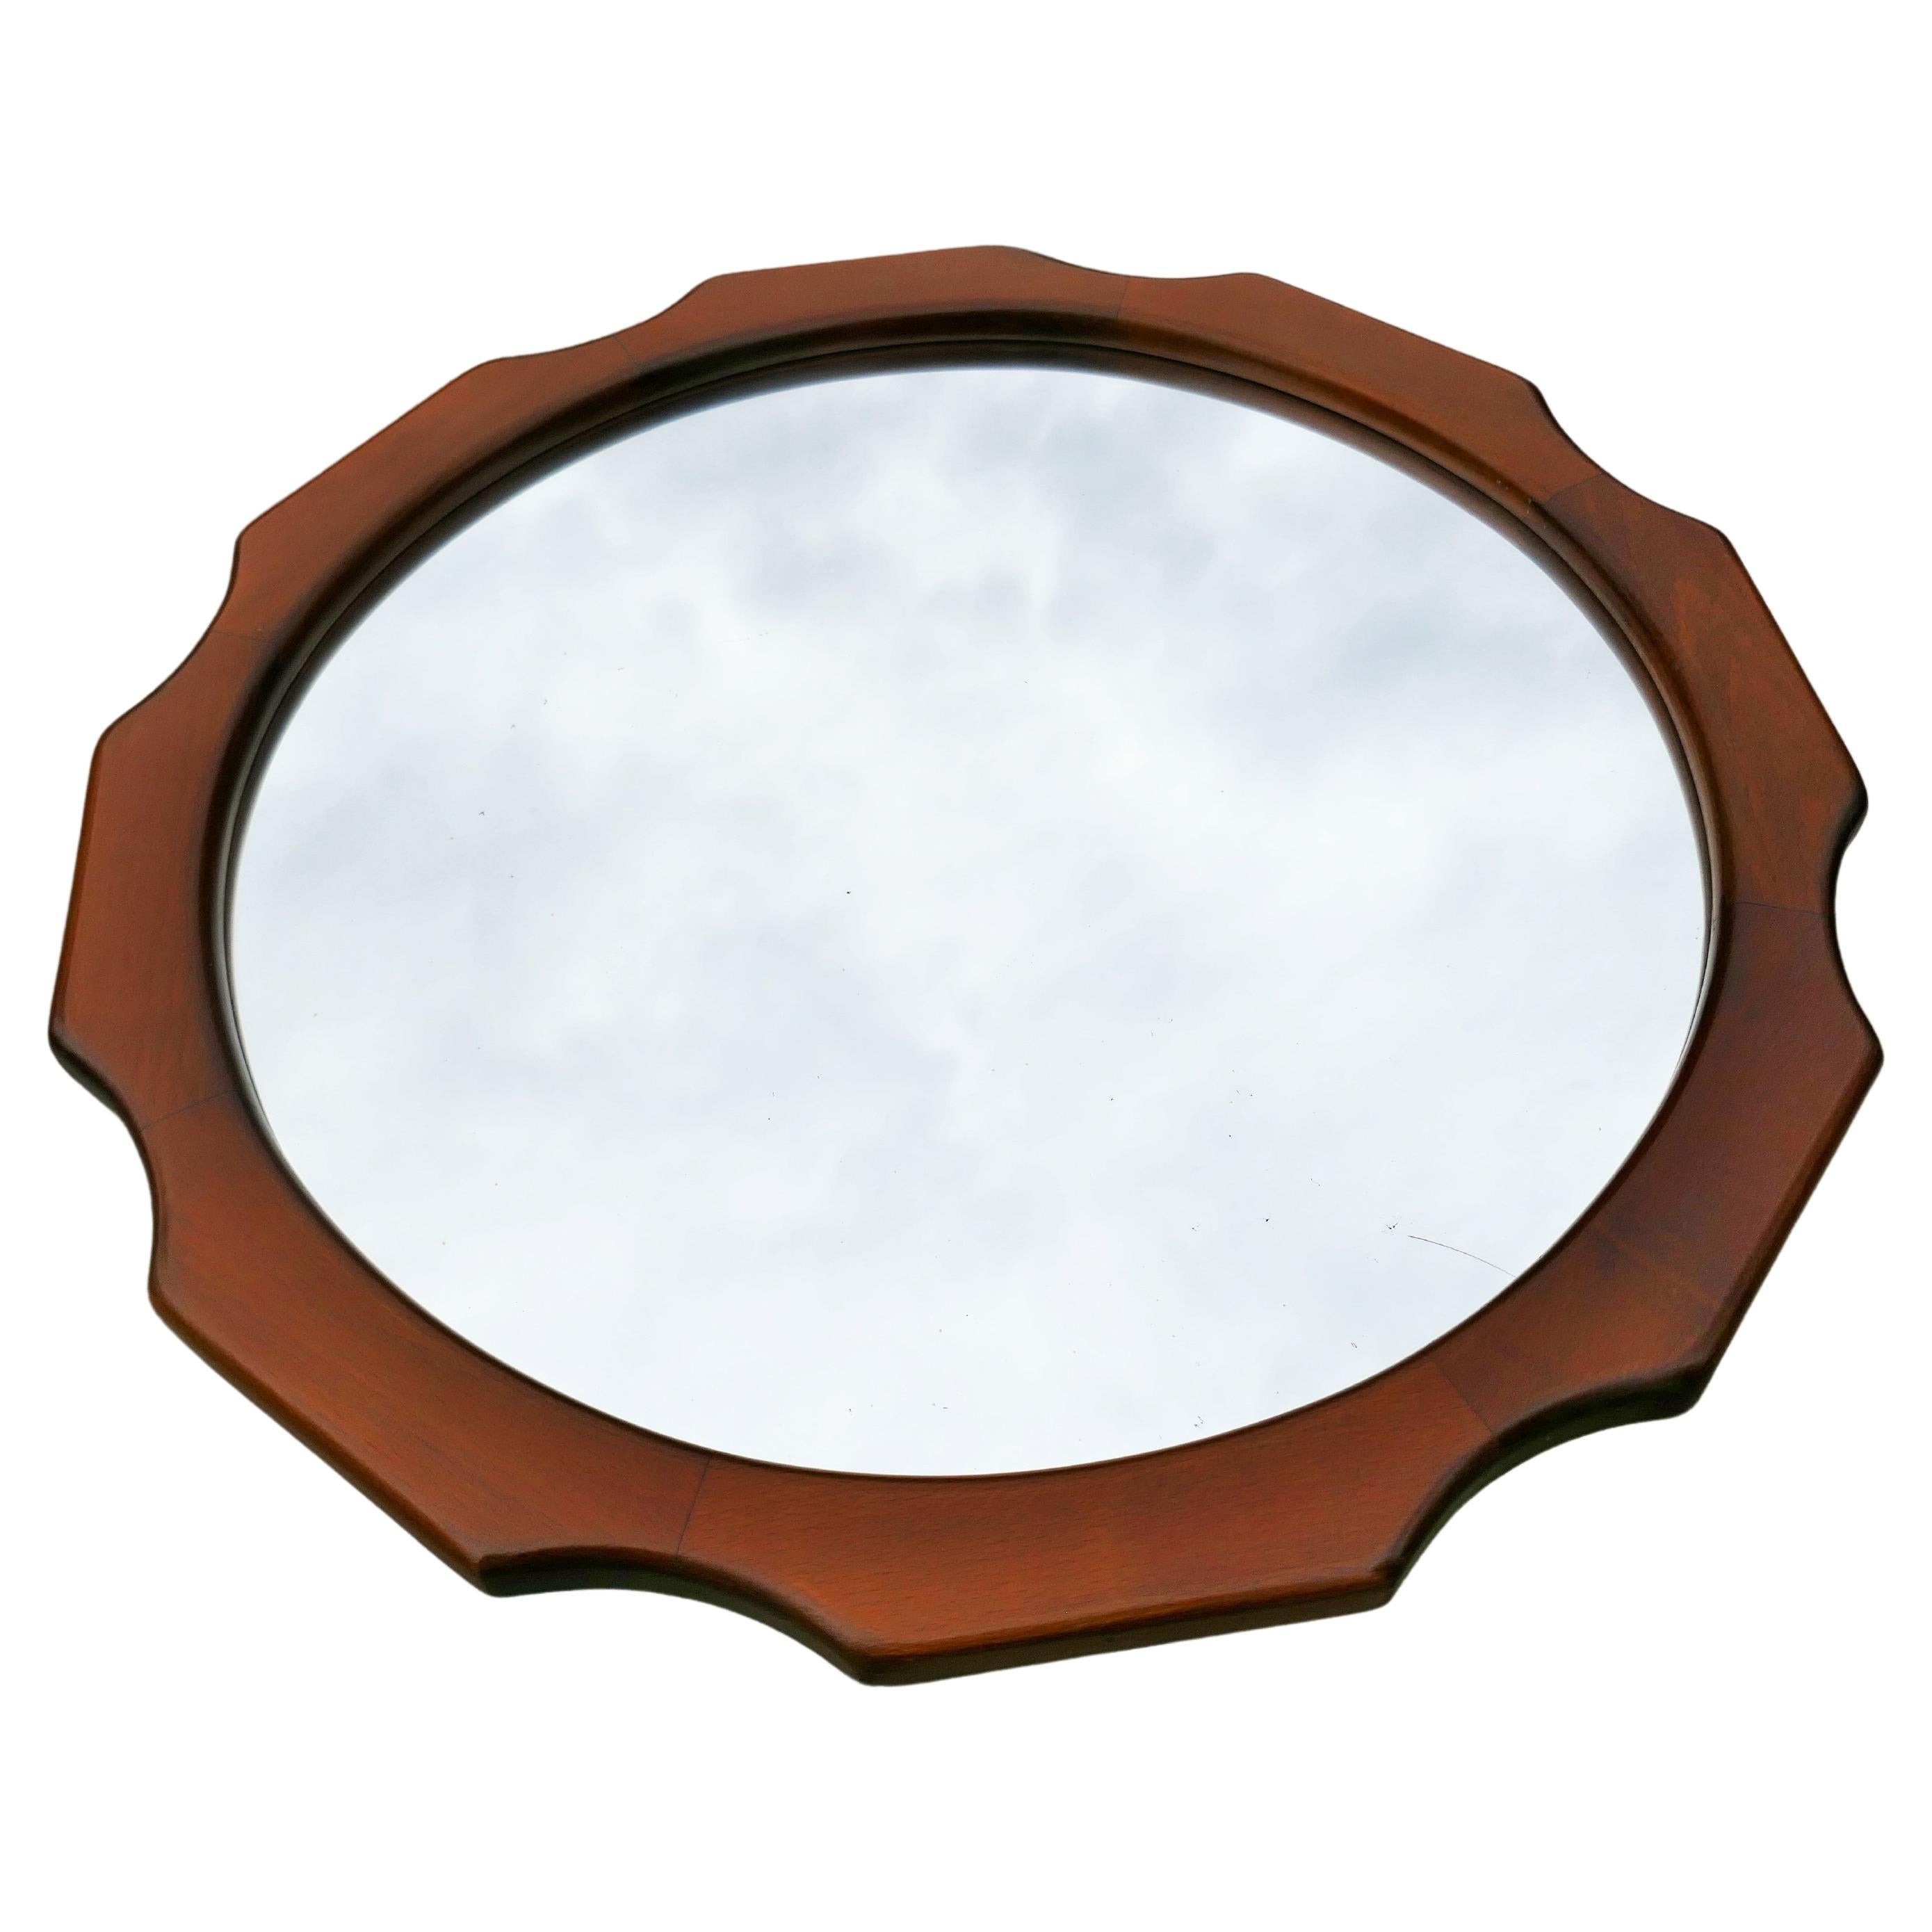 Wooden mirror in good condition.
Thank you